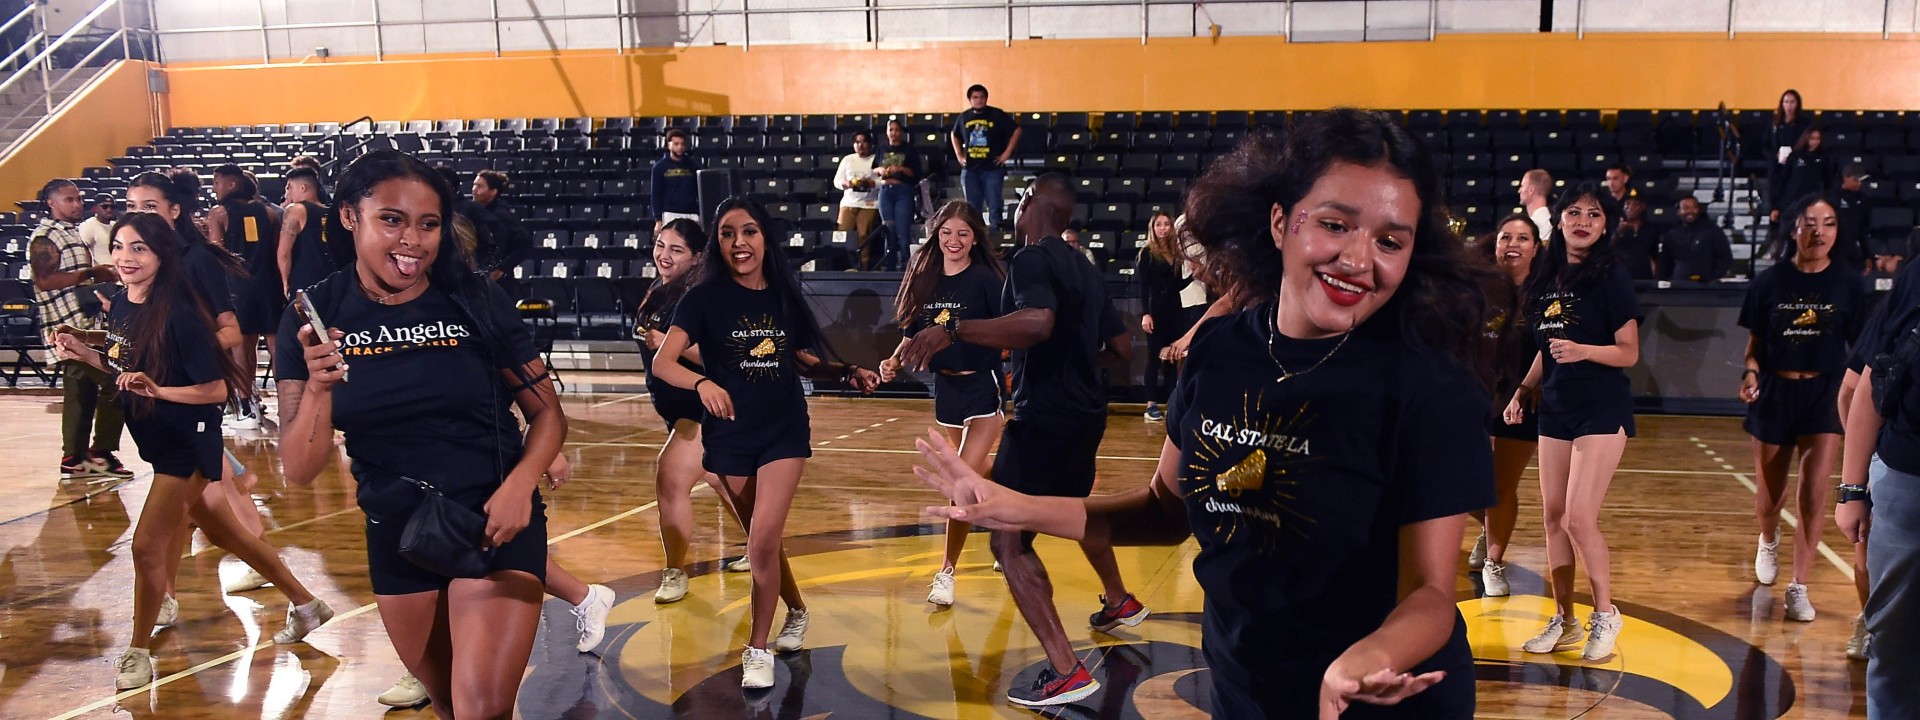 Dance team in identical t-shirts and shorts smiling mid-dance step.